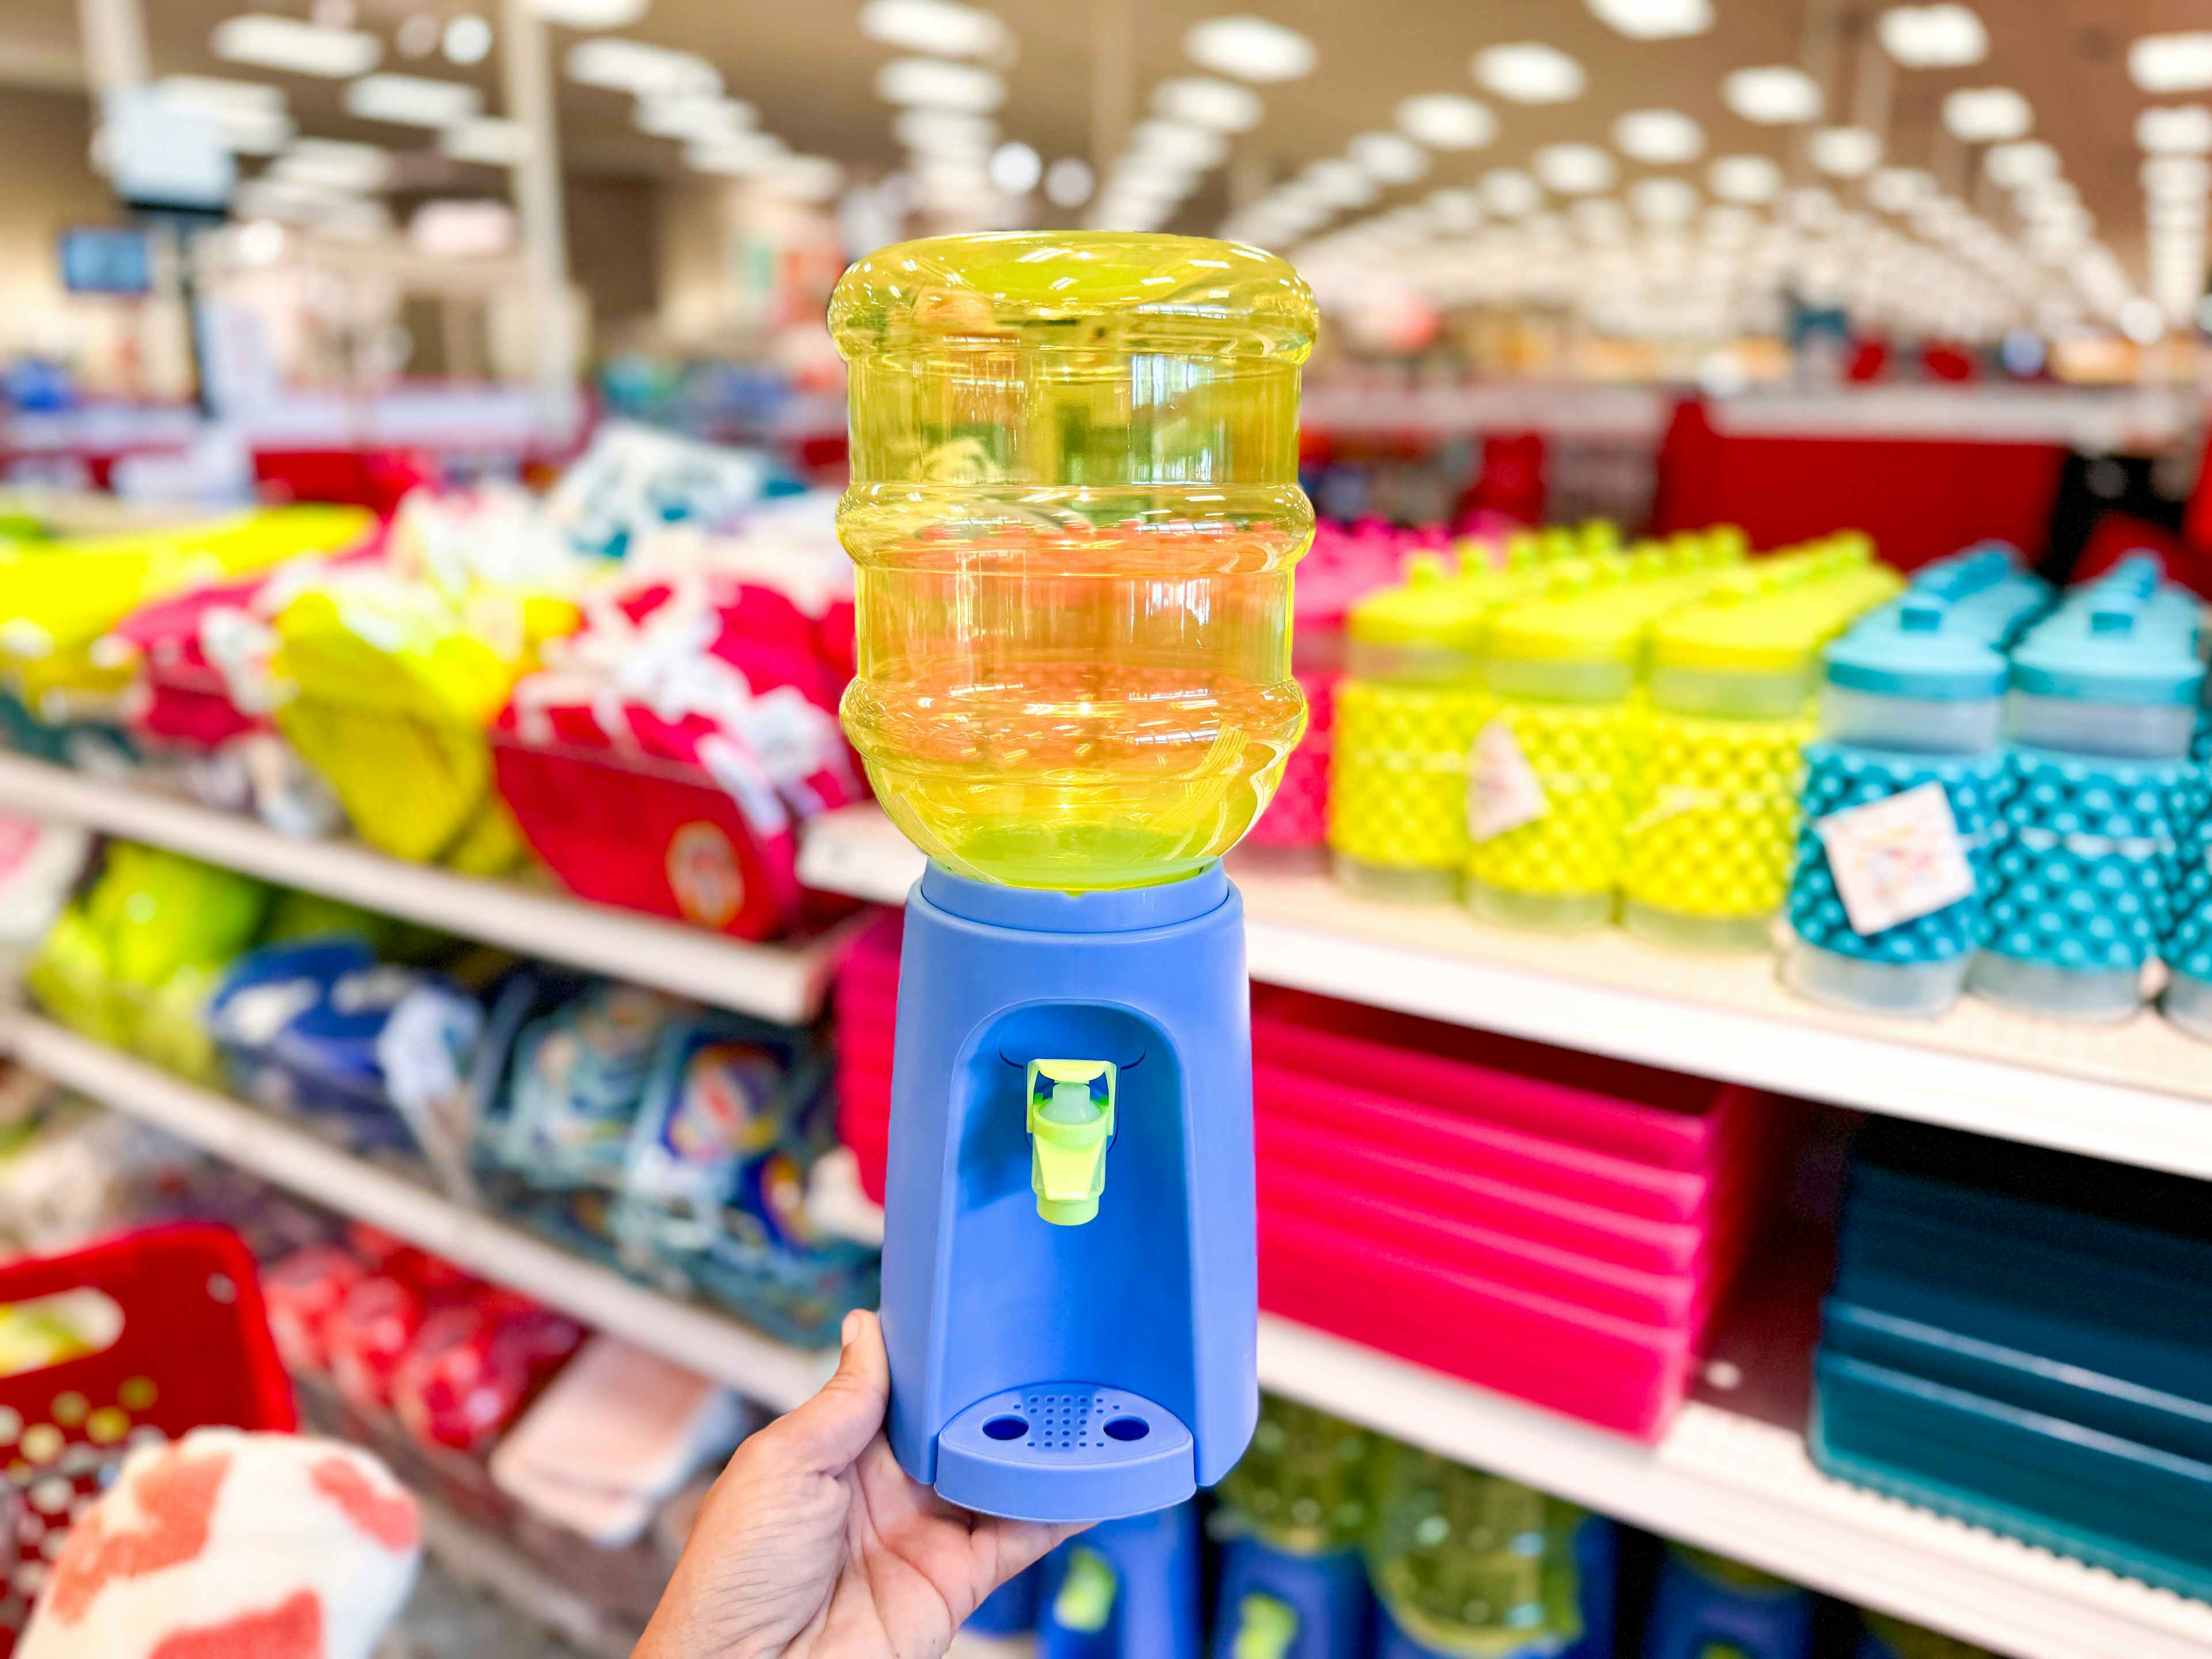 hand holding a yellow and blue beverage dispenser